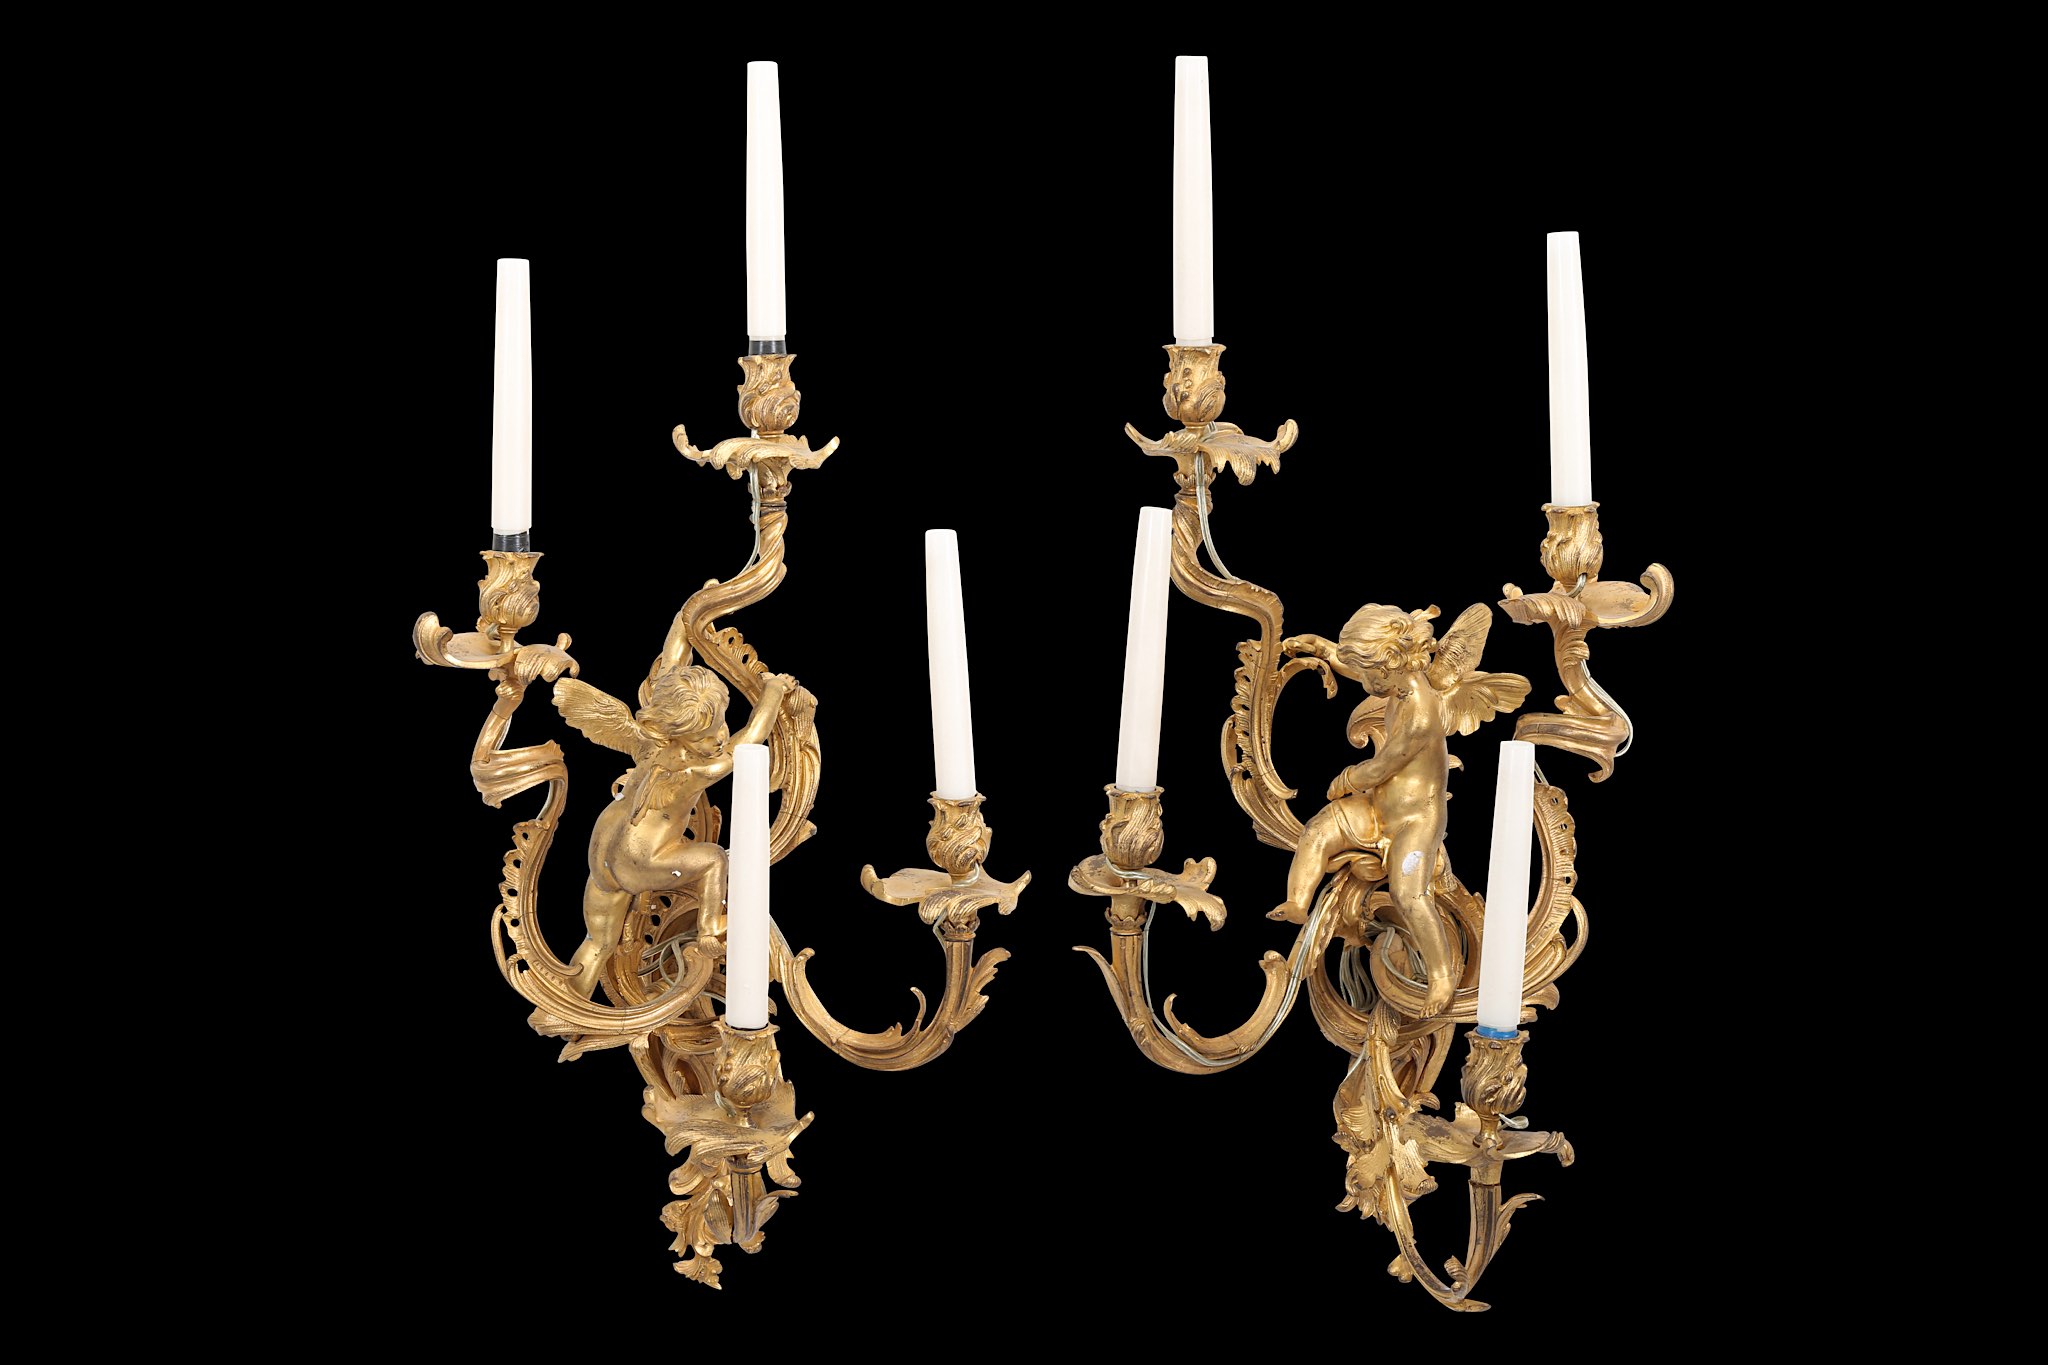 A LARGE AND IMPRESSIVE PAIR OF 19TH CENTURY FRENCH GILT BRONZE FIGURAL WALL LIGHTS IN THE ROCOCO